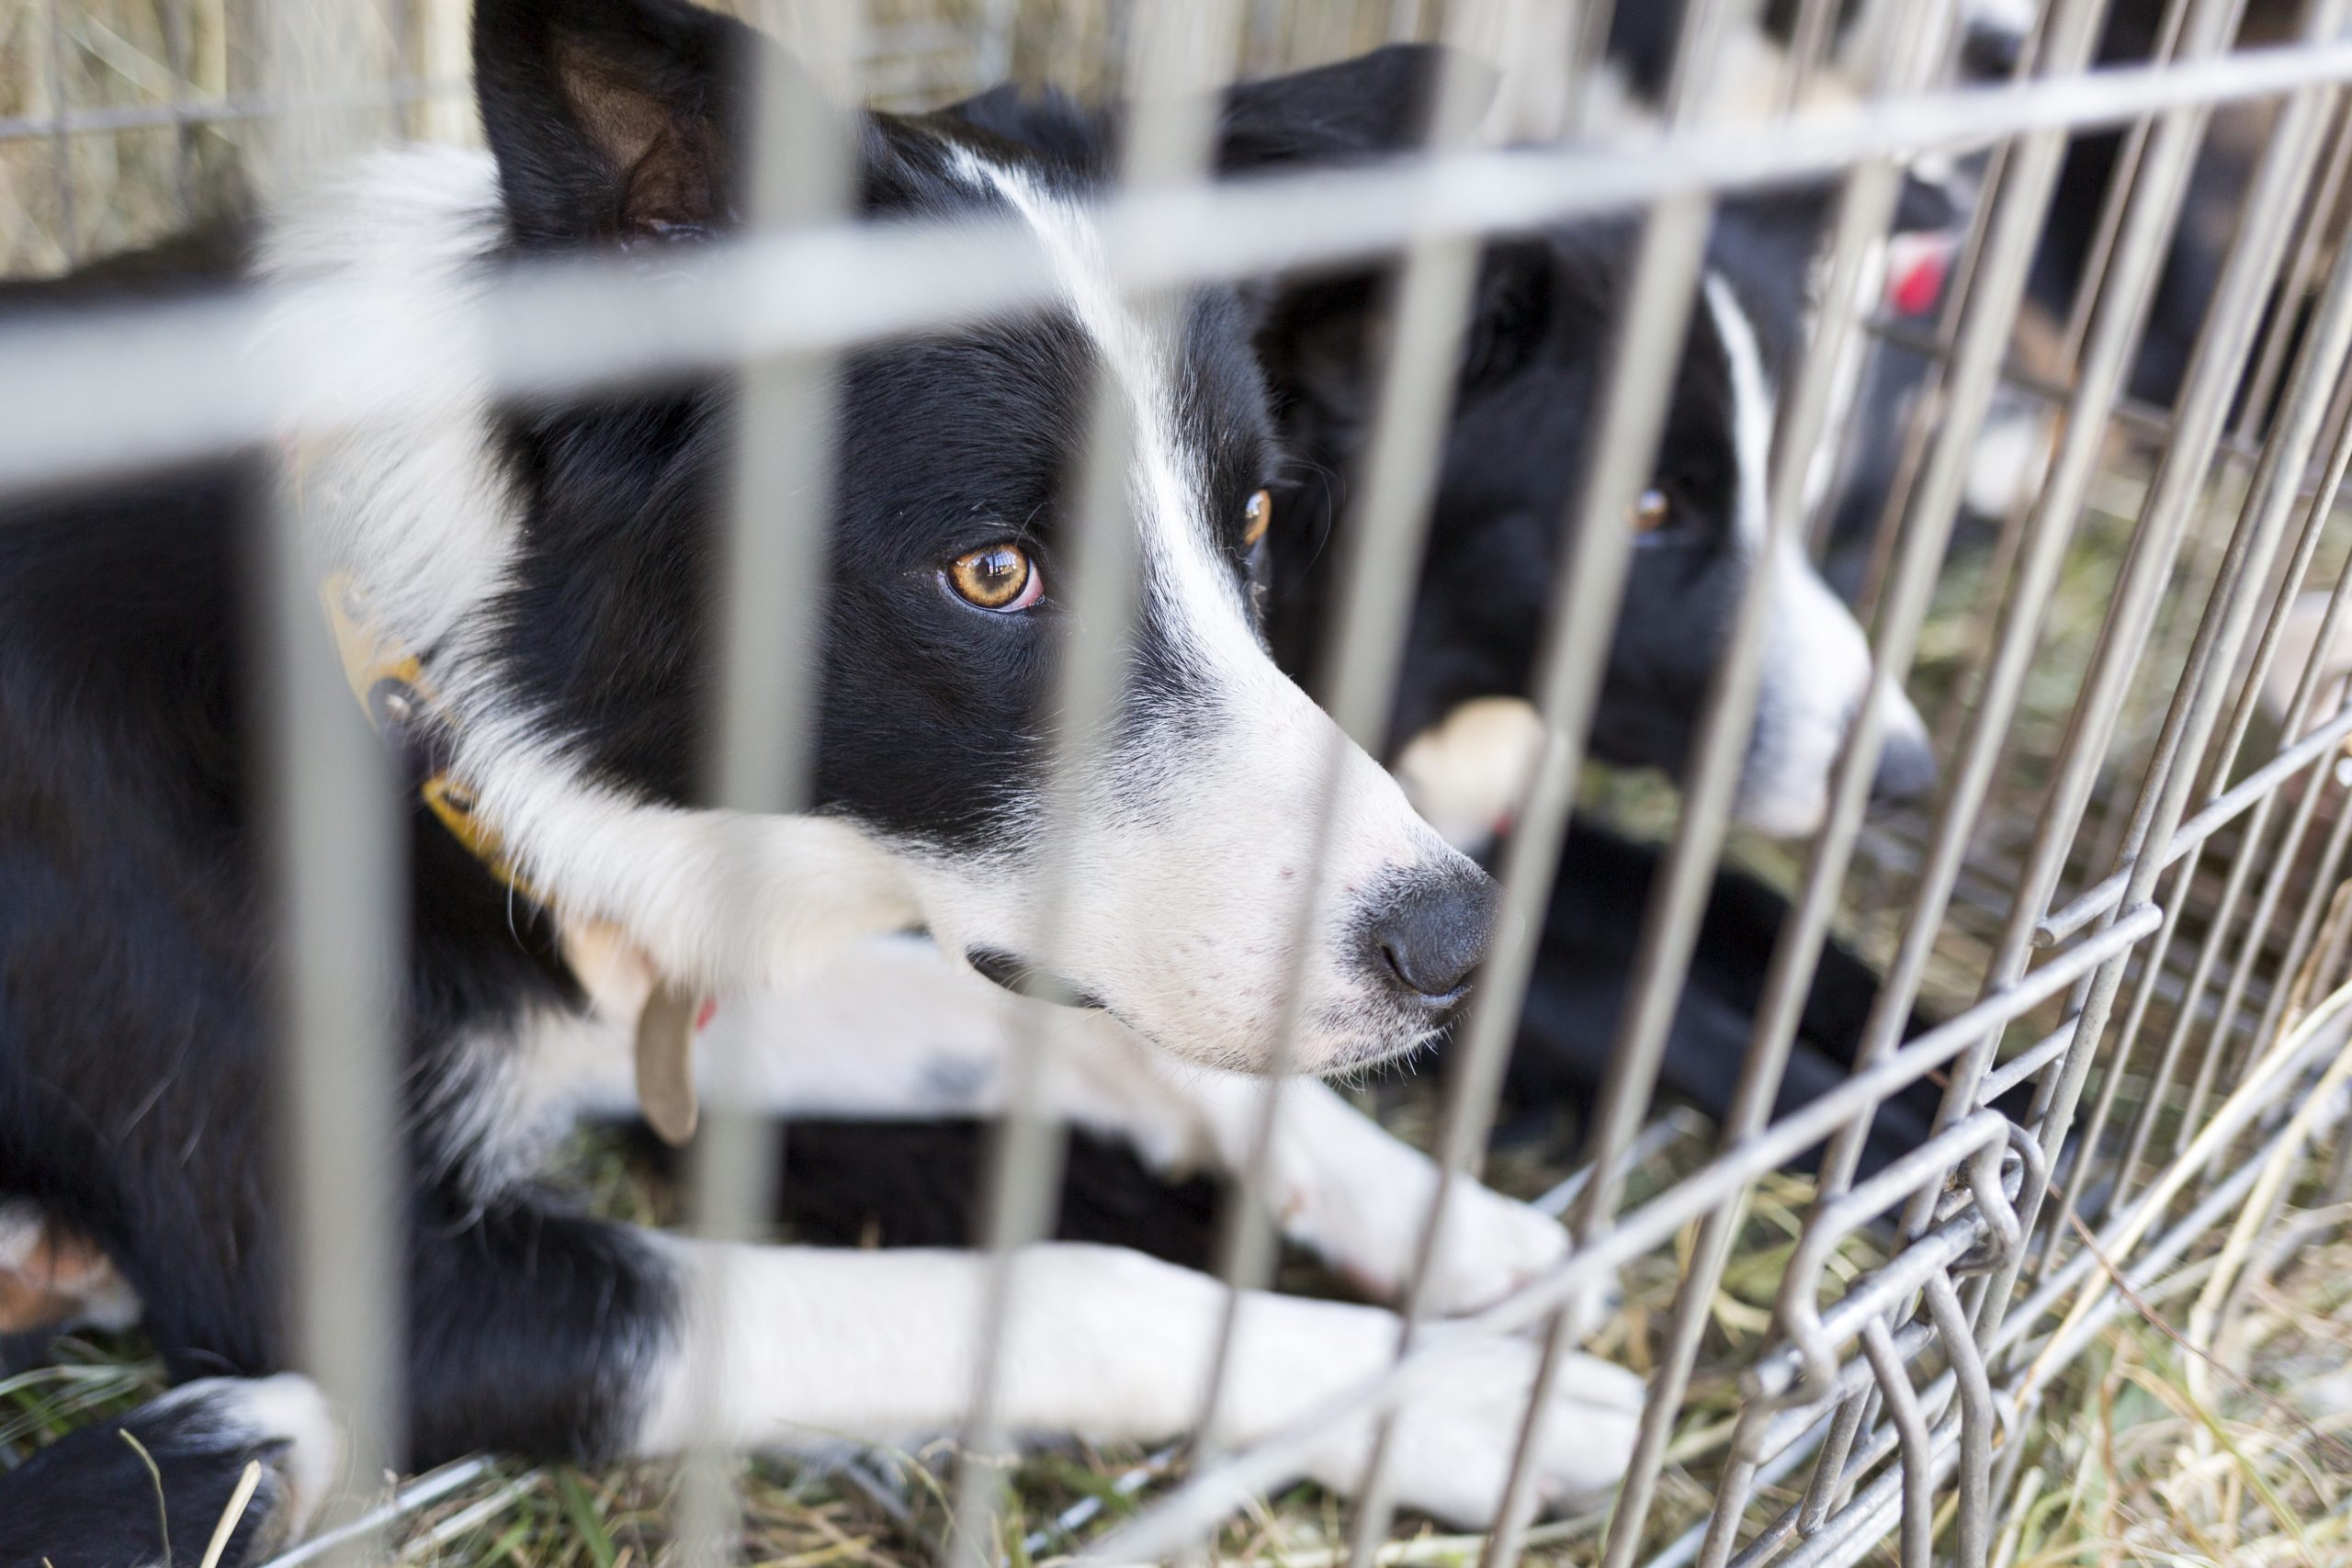 Animal Shelter In Florida Is In Urgent Need! Join the Movement to Help Homeless Pets